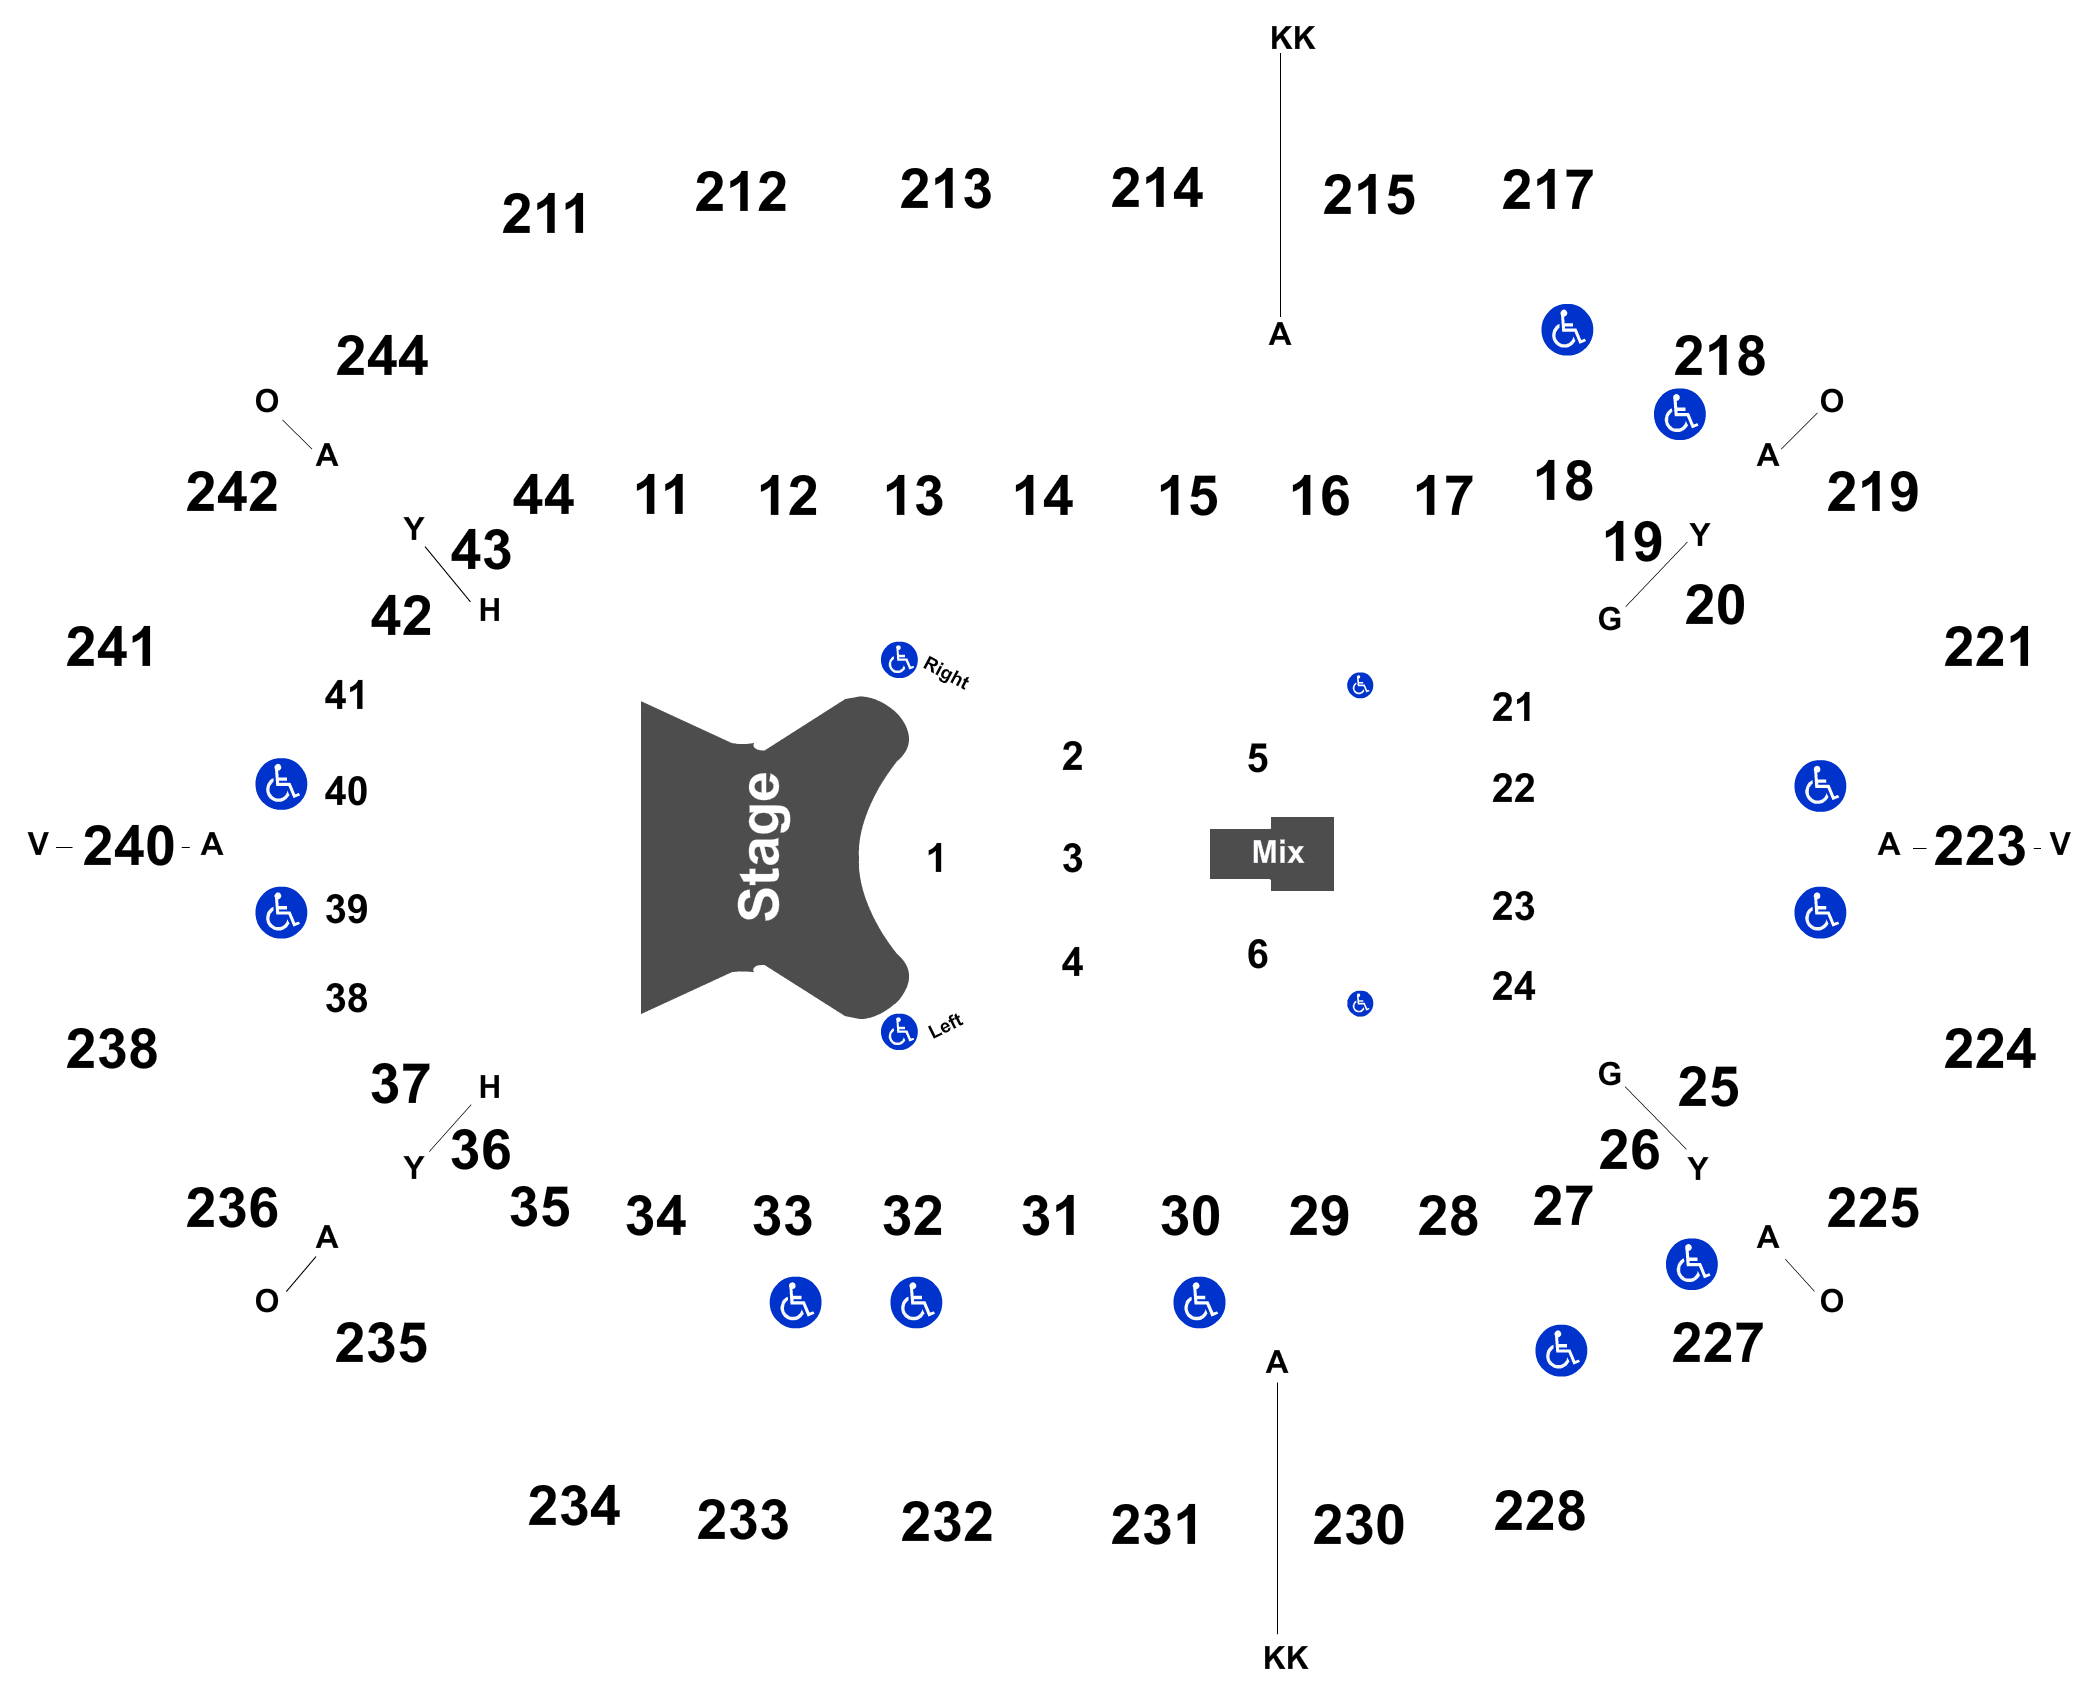 Rupp Arena Seating Chart Section 231